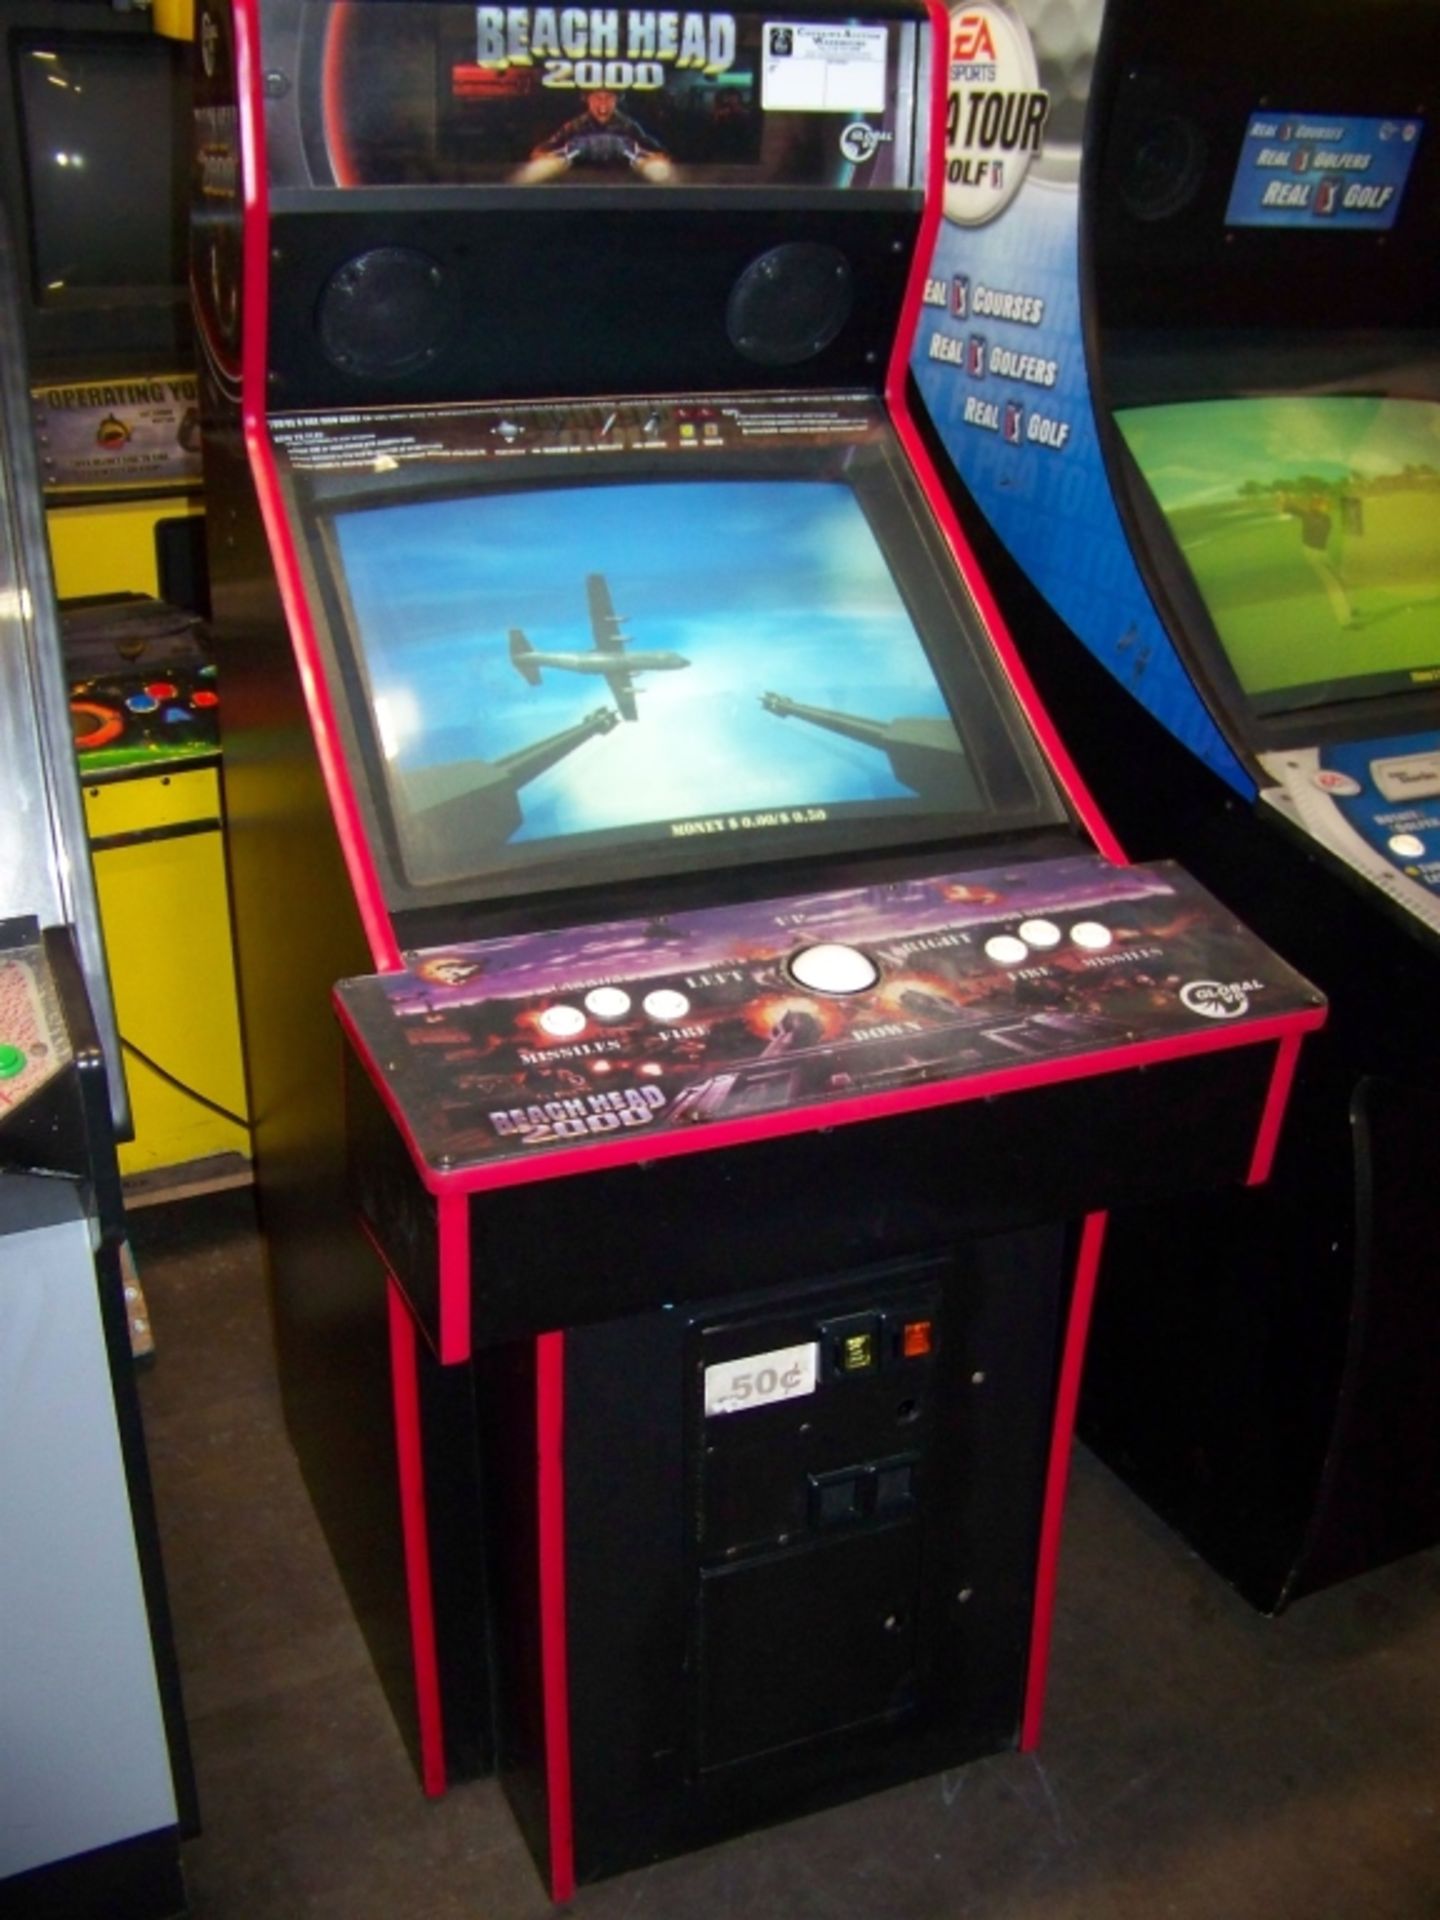 BEACH HEAD 2000 PUP CABINET ARCADE GAME - Image 3 of 3